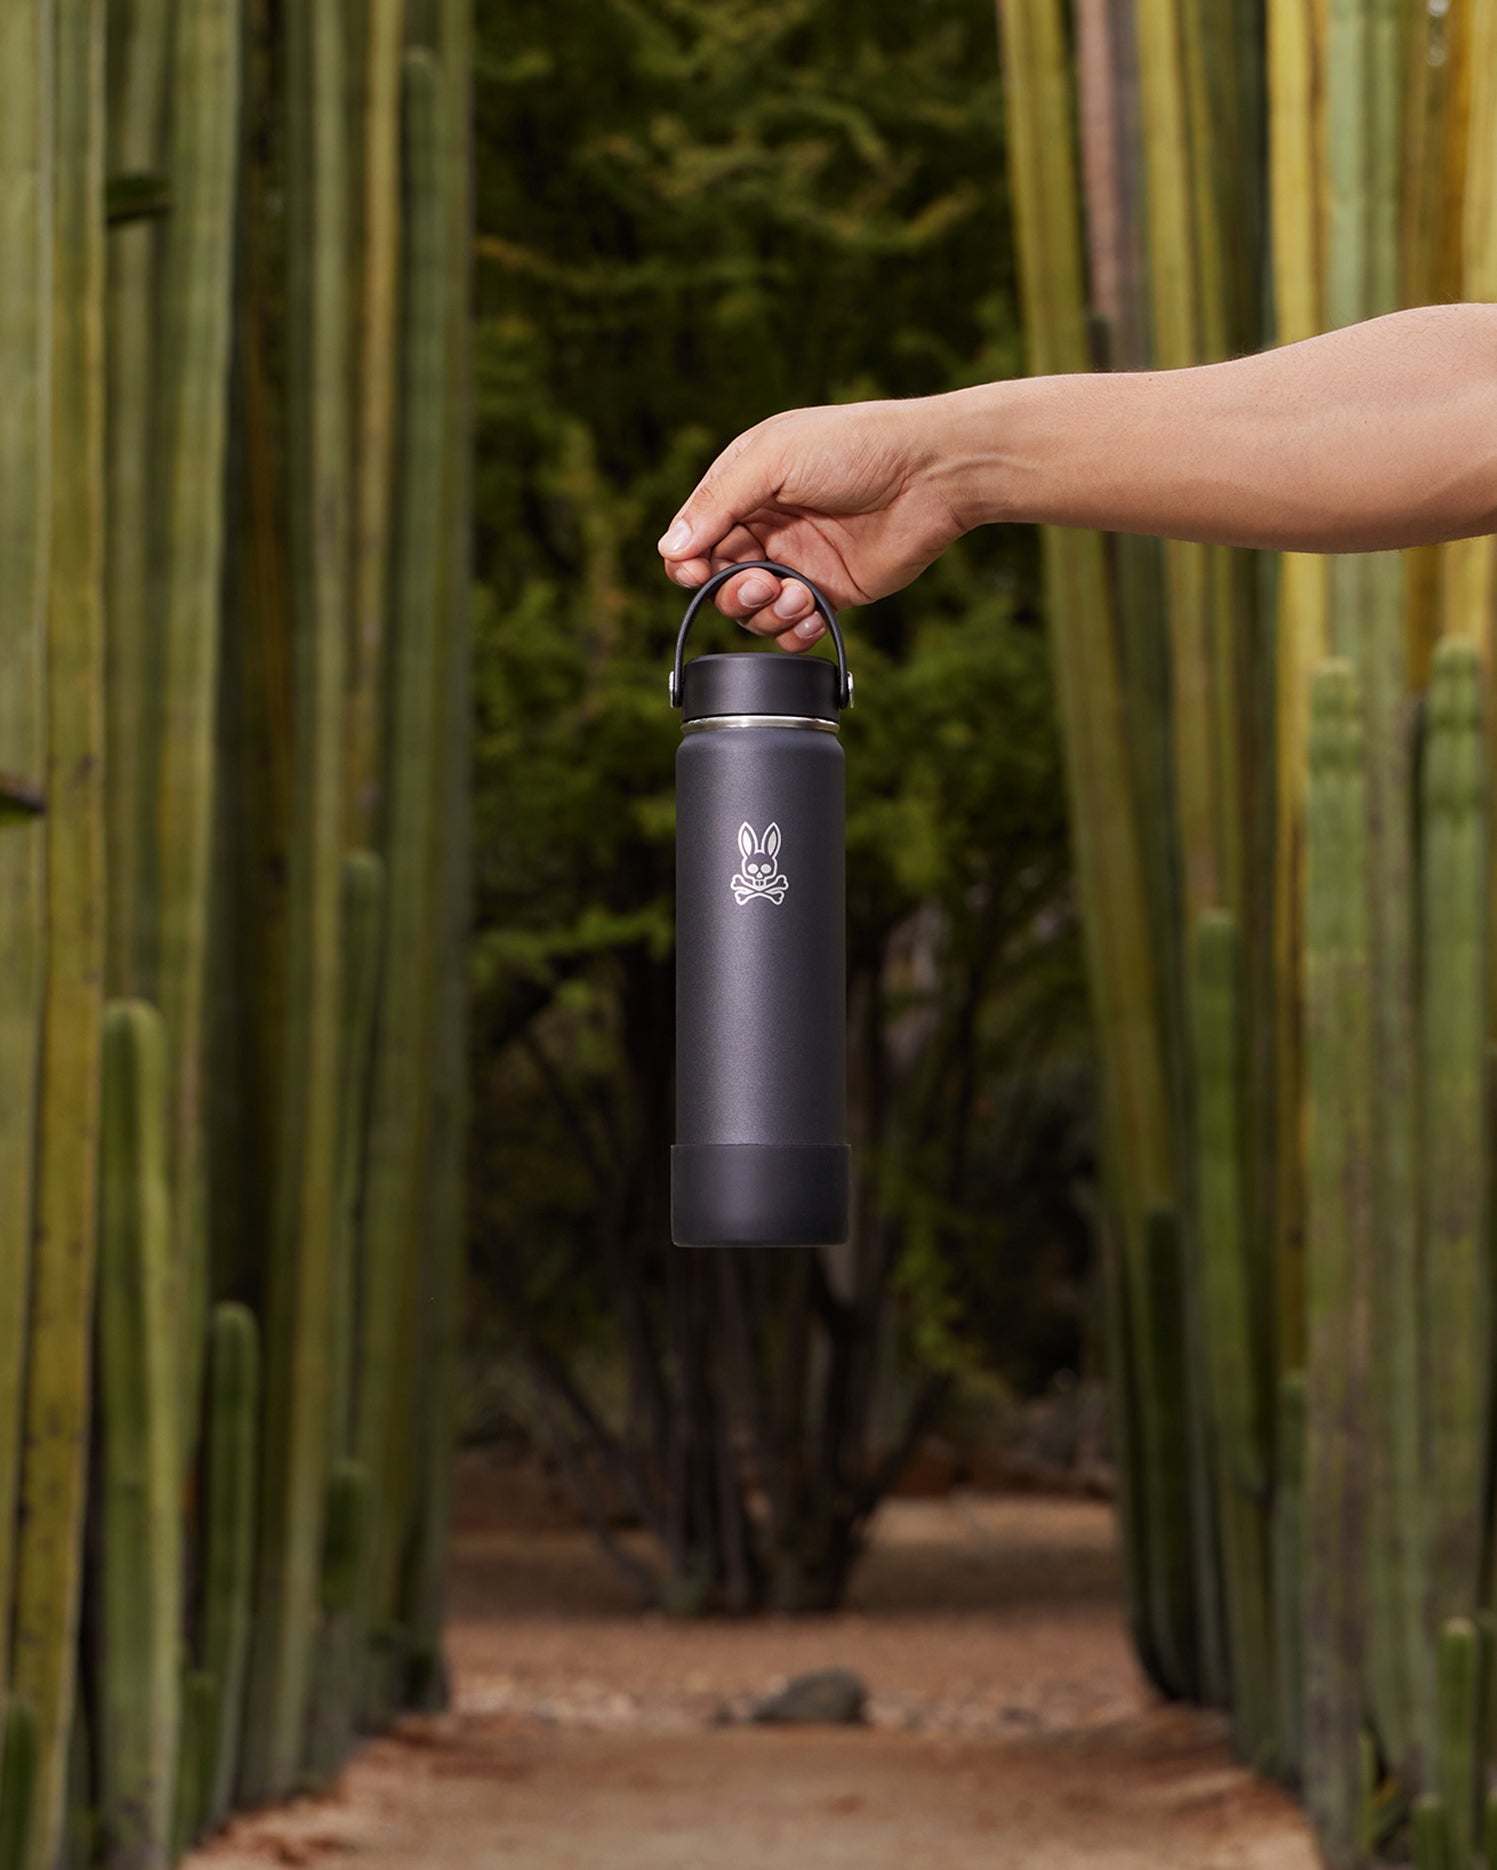 A person's hand holding a Psycho Bunny insulated stainless steel water bottle (B6A909U1BO) by its handle in front of tall cactus plants in a desert setting. The bottle features a logo of a rabbit.